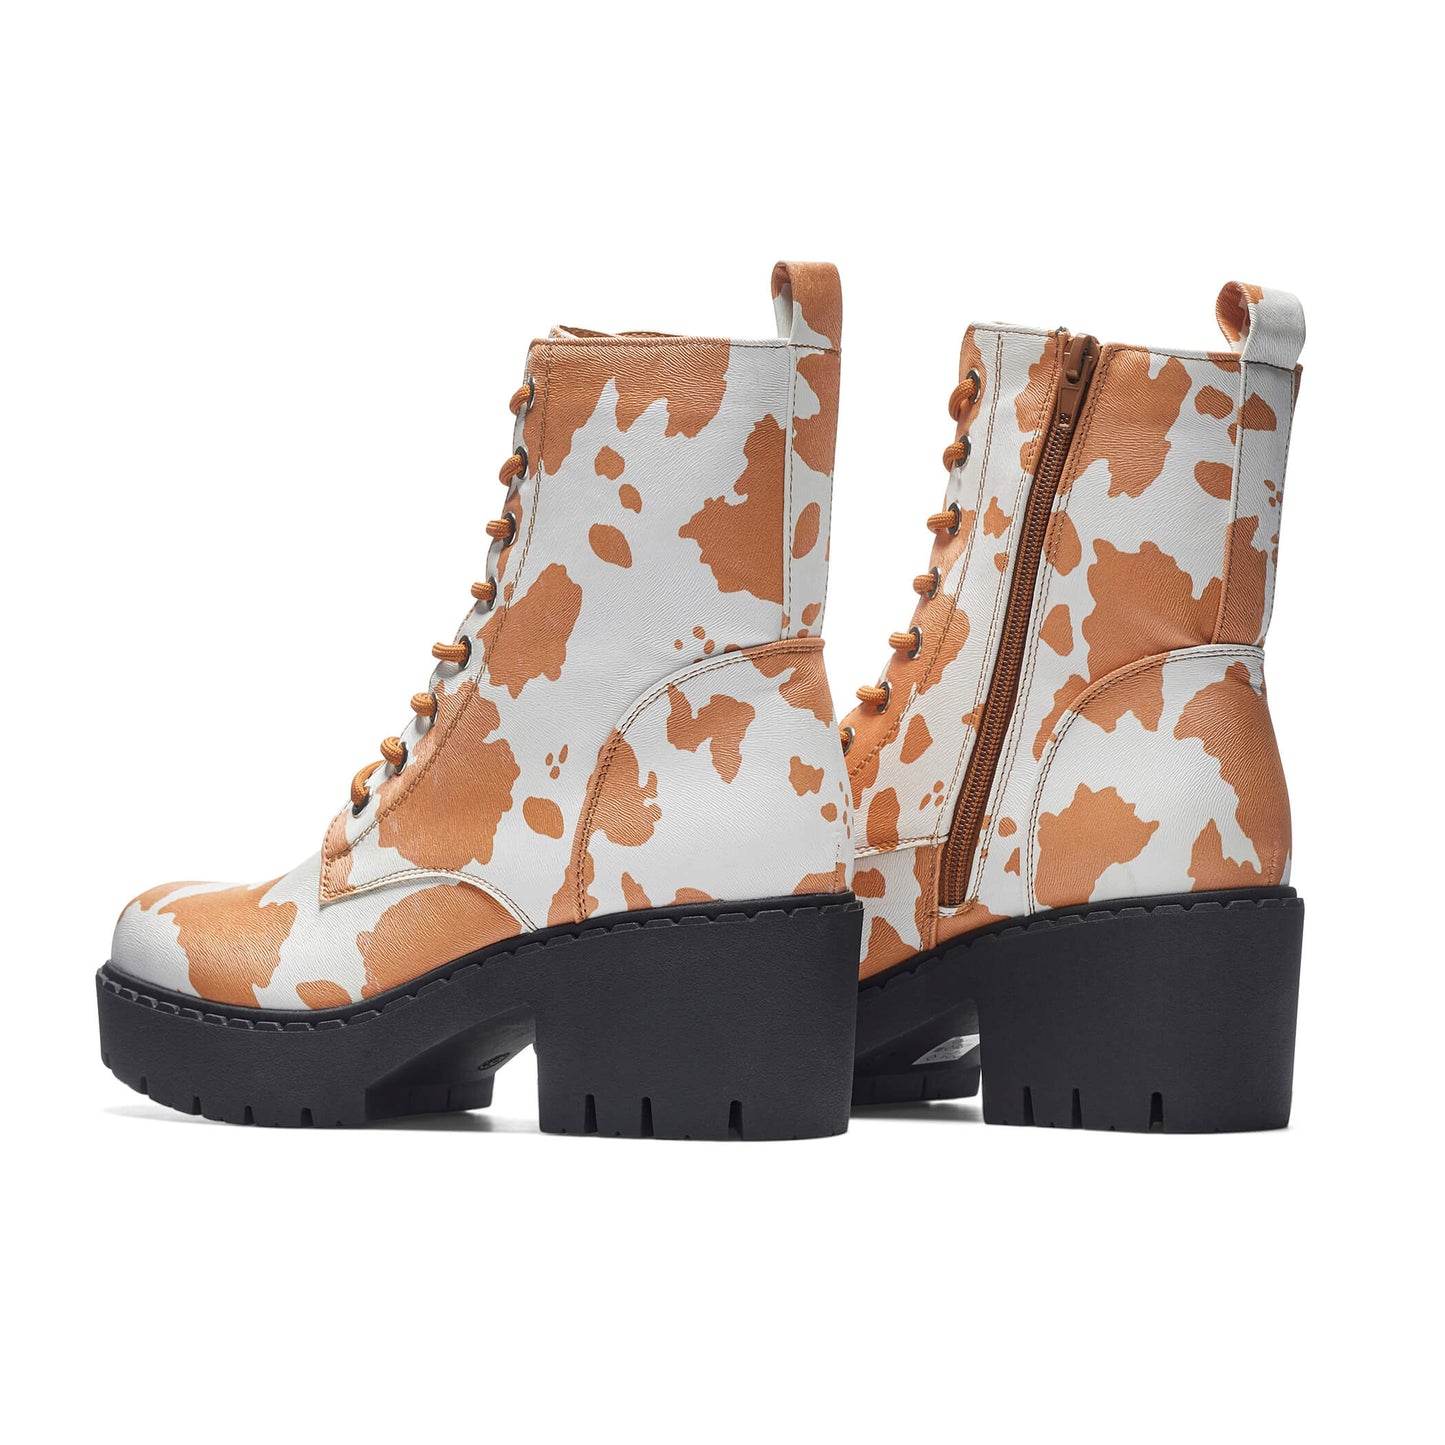 Clarabelle Brown Cow Print Switch Lace Up Boots - Ankle Boots - KOI Footwear - Black - Back Side View